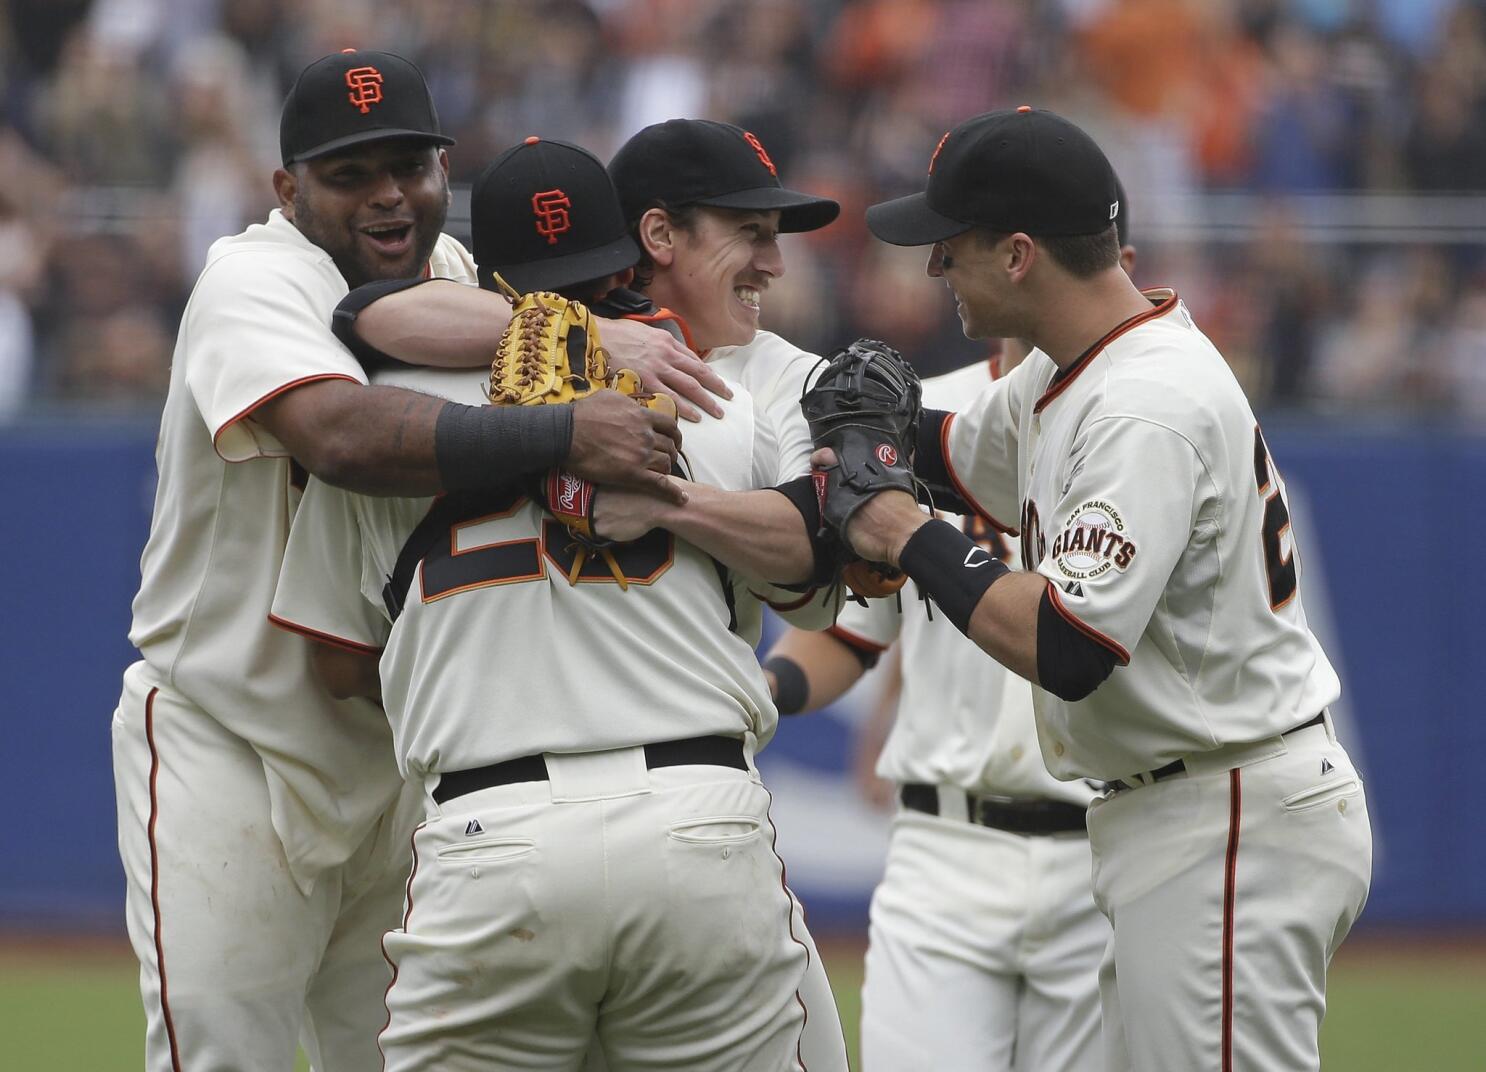 170 Best SF Giants Players ideas  sf giants players, giants players, sf  giants